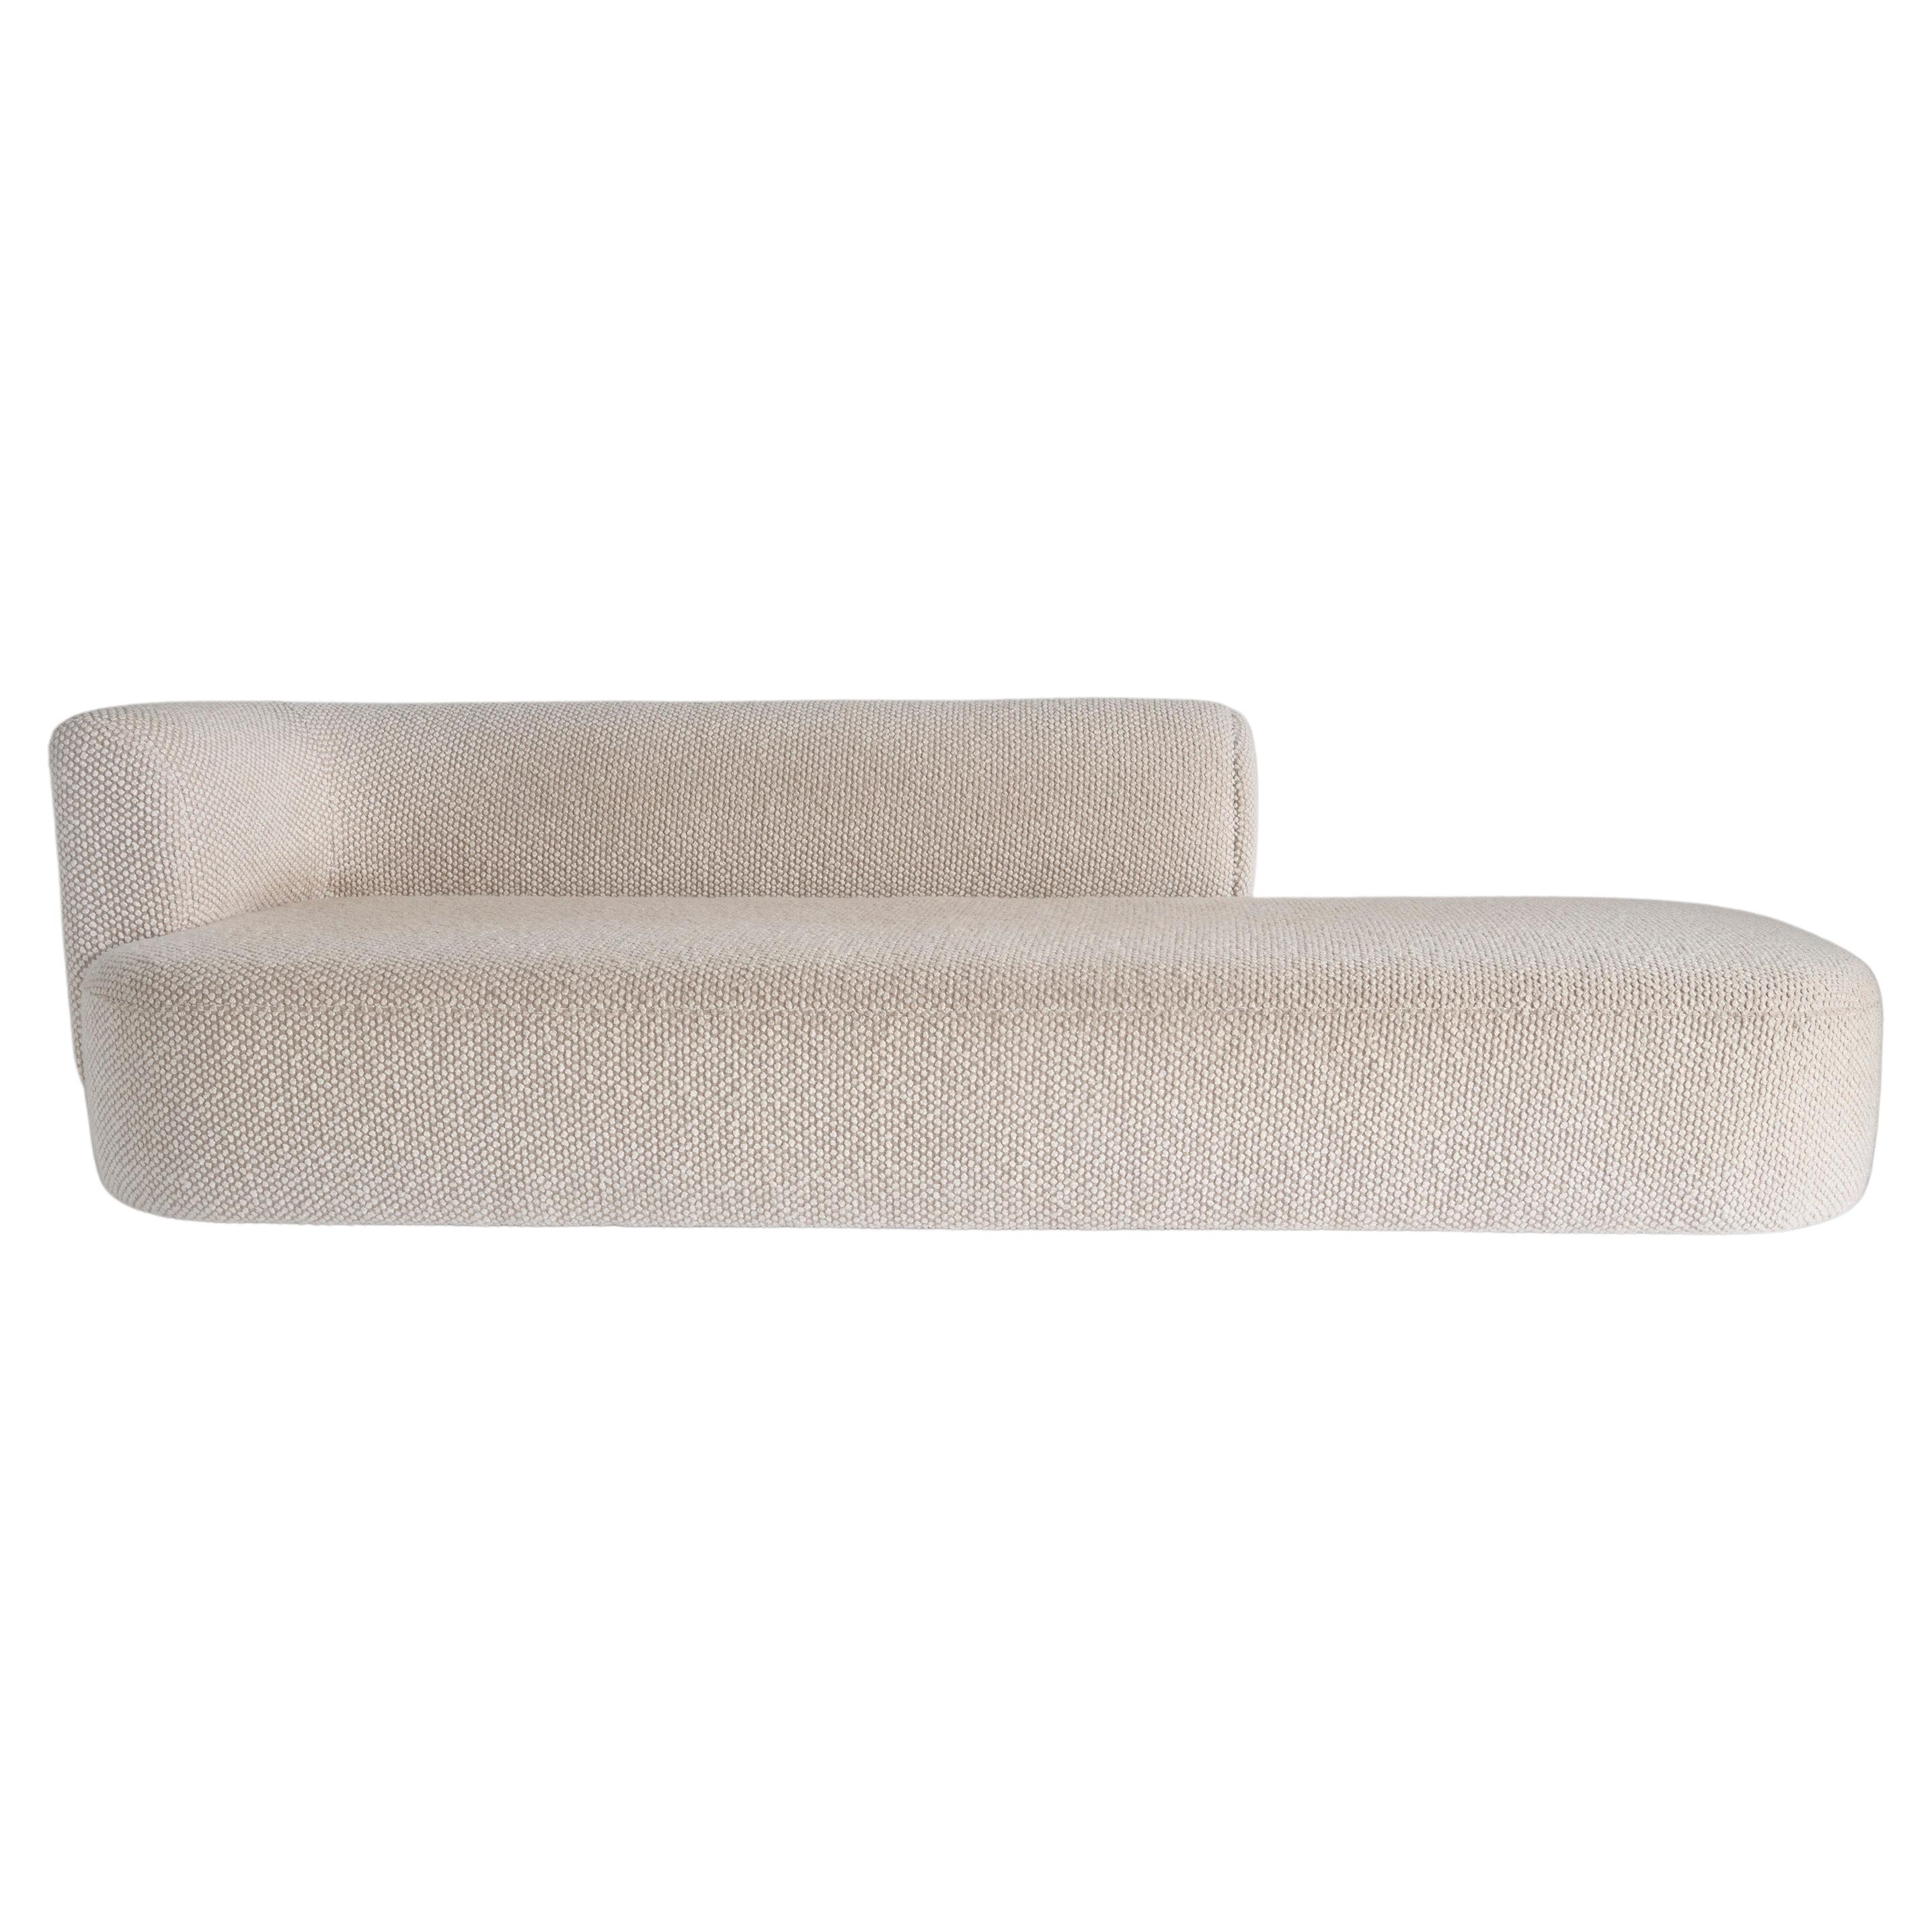 Capper Chaise- 86" by Phase Design, Fabric For Sale